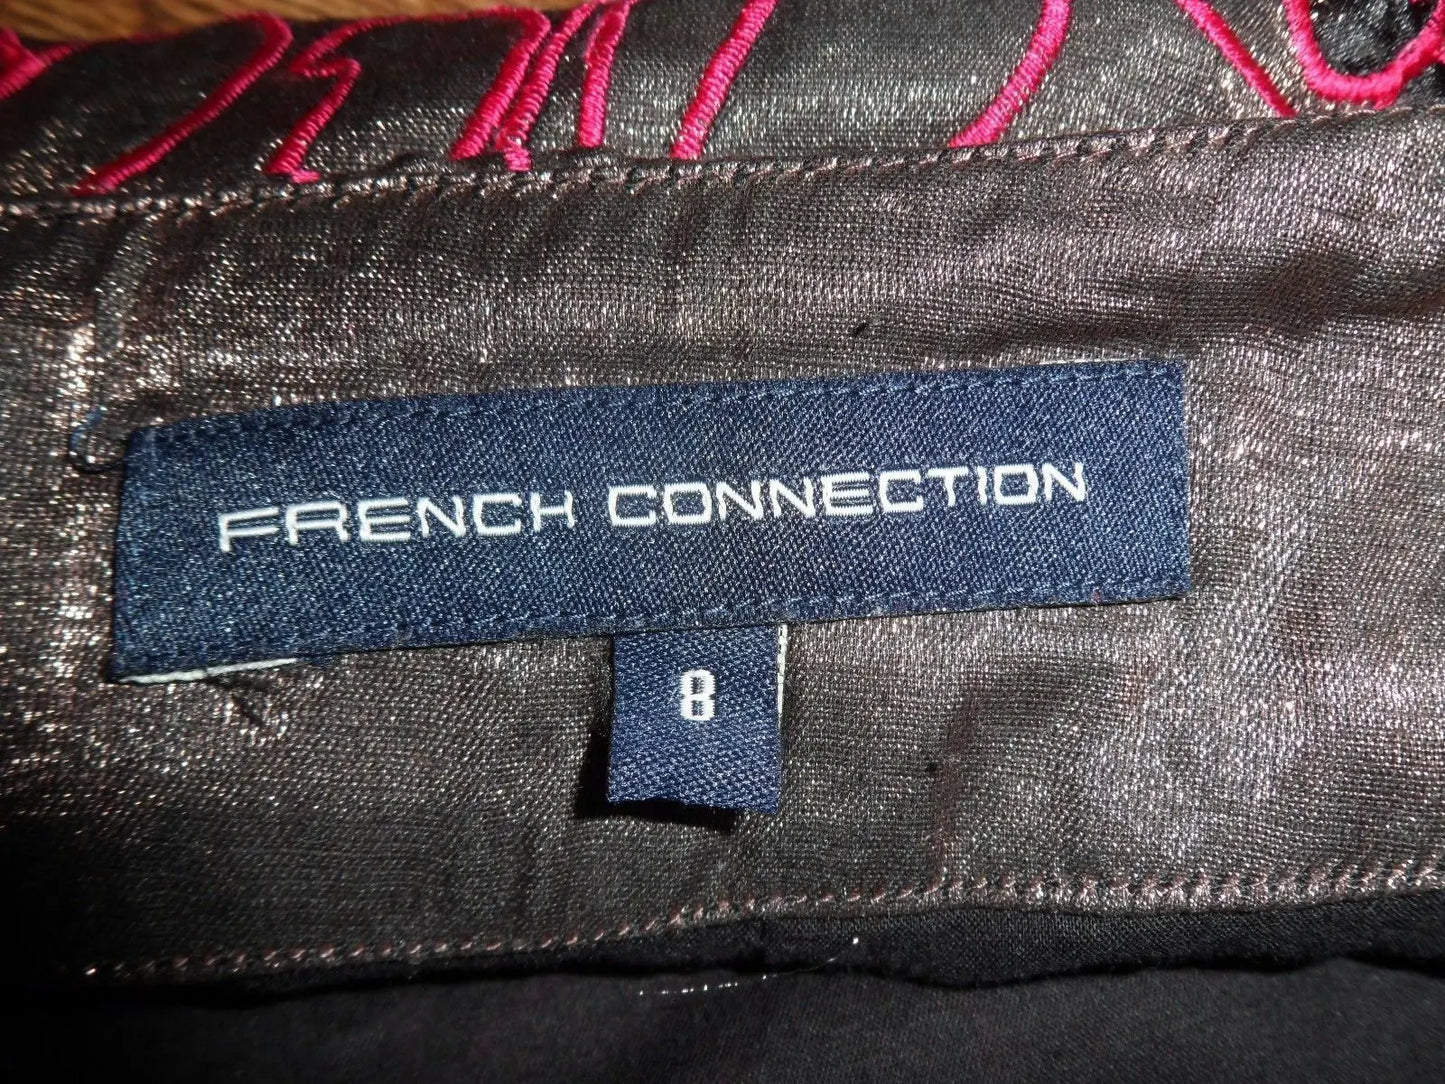 Lush French Connection knee length occasion skirt. grey/Pink. Size 8 French Connection